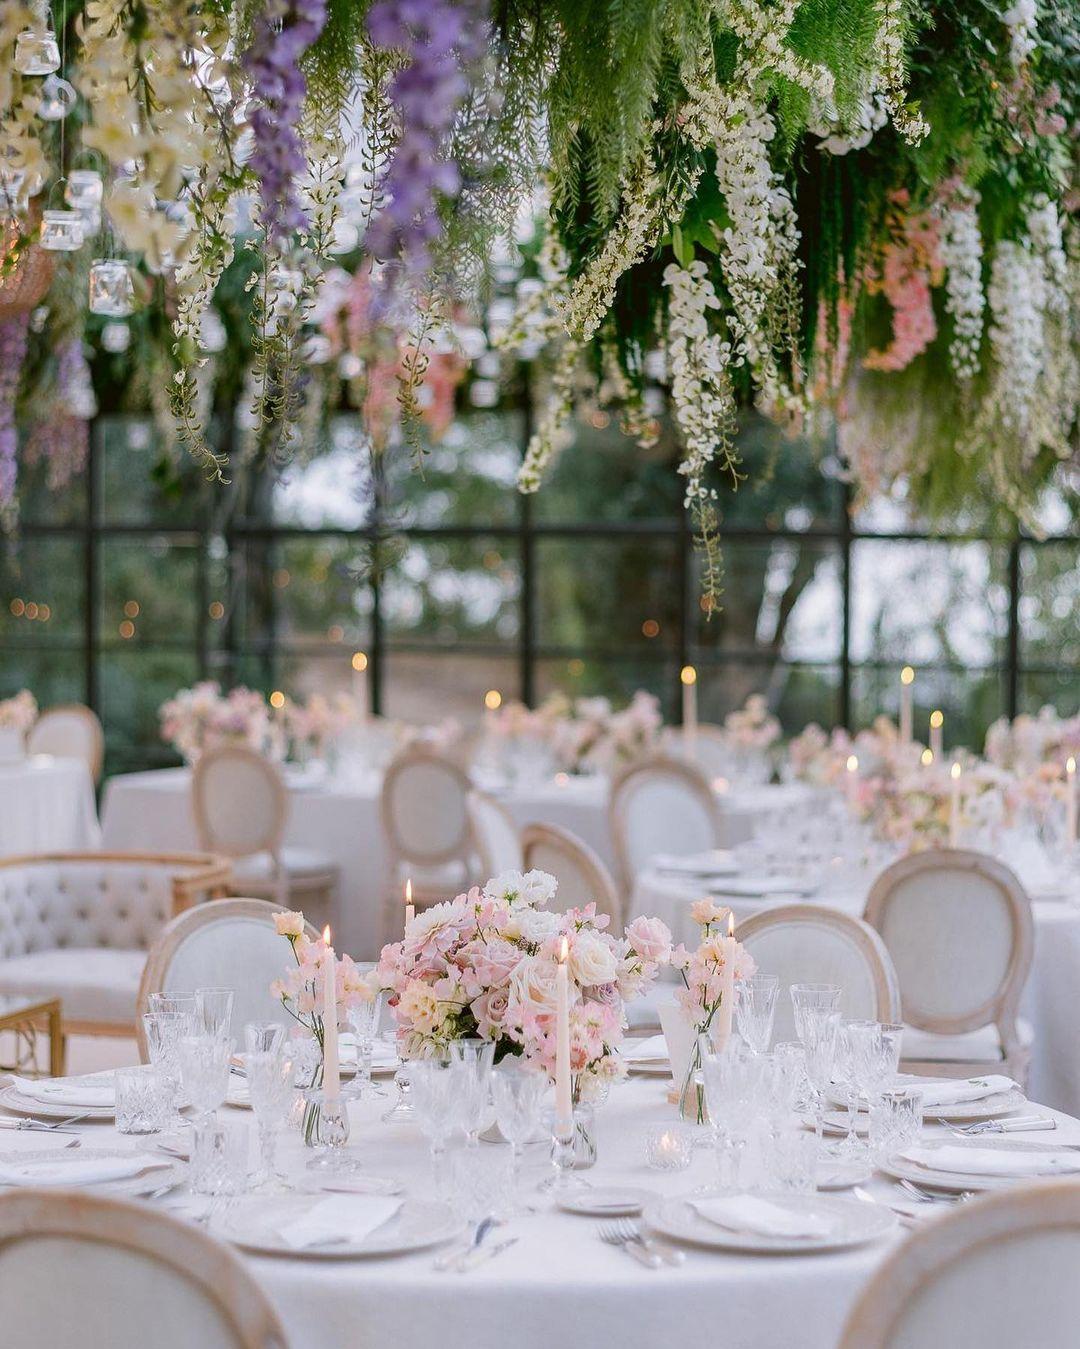 class="content__text"
 M&amp;A’s orangerie dinner from last Fall at gorgeous @chateaustmartin, beautifully captured by our friend @gregfinck 

@mgimage @missrose_by_perrine @aucop_event @deco_flamme 
 